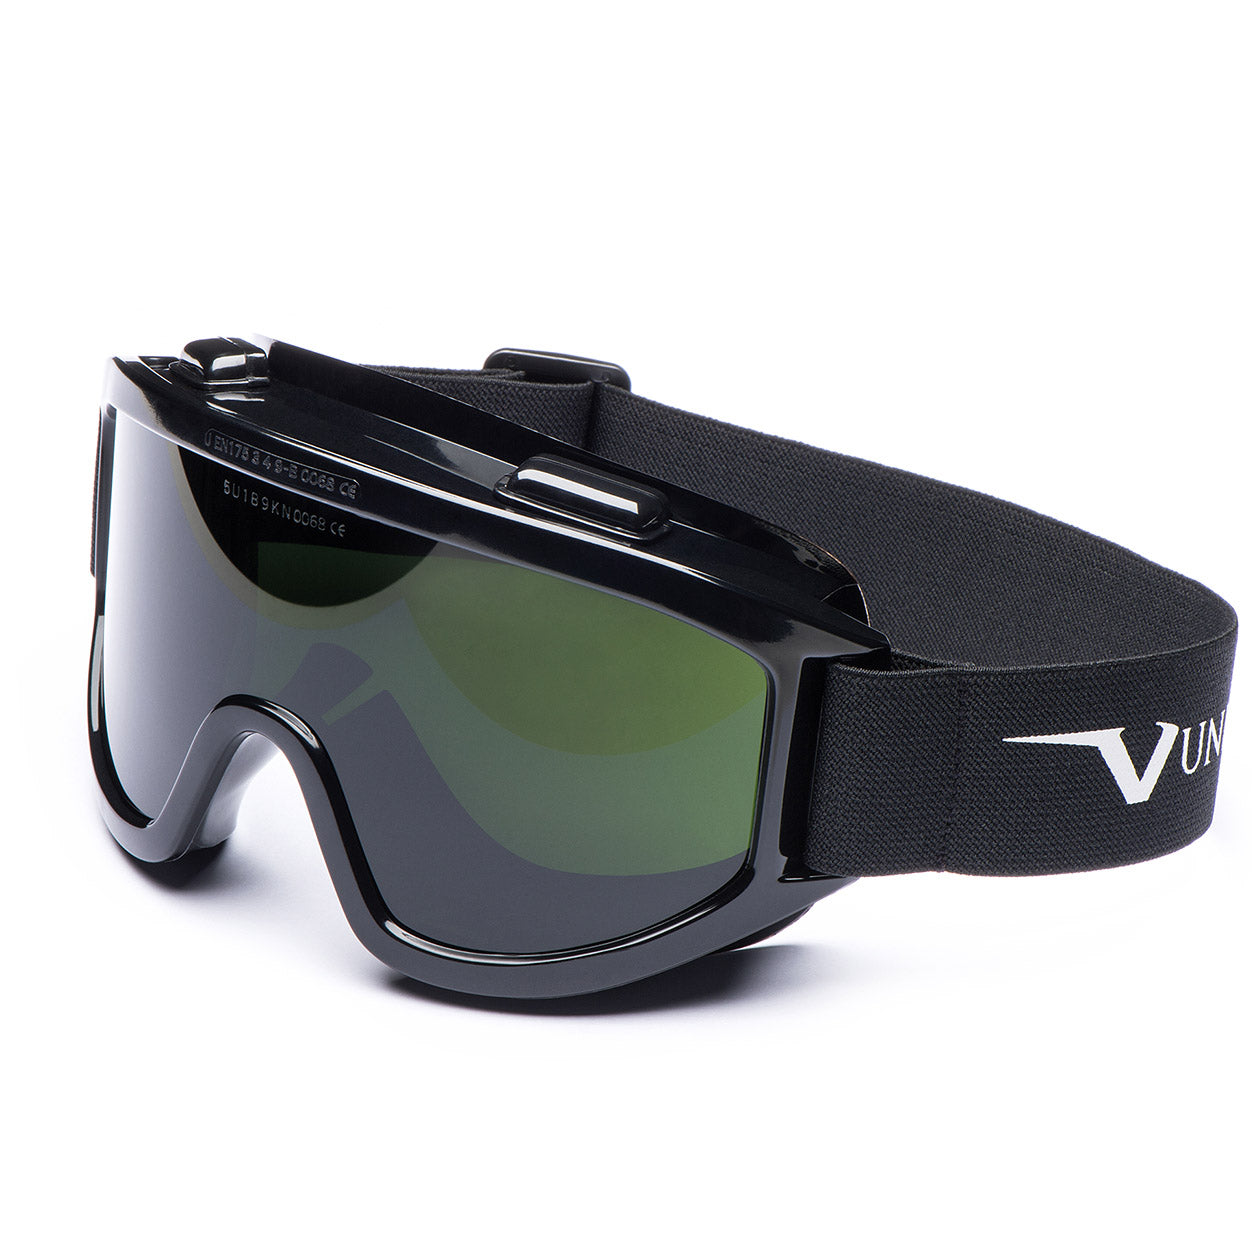 Univet 601 Ventilated Welding Shade 5 Safety Goggles